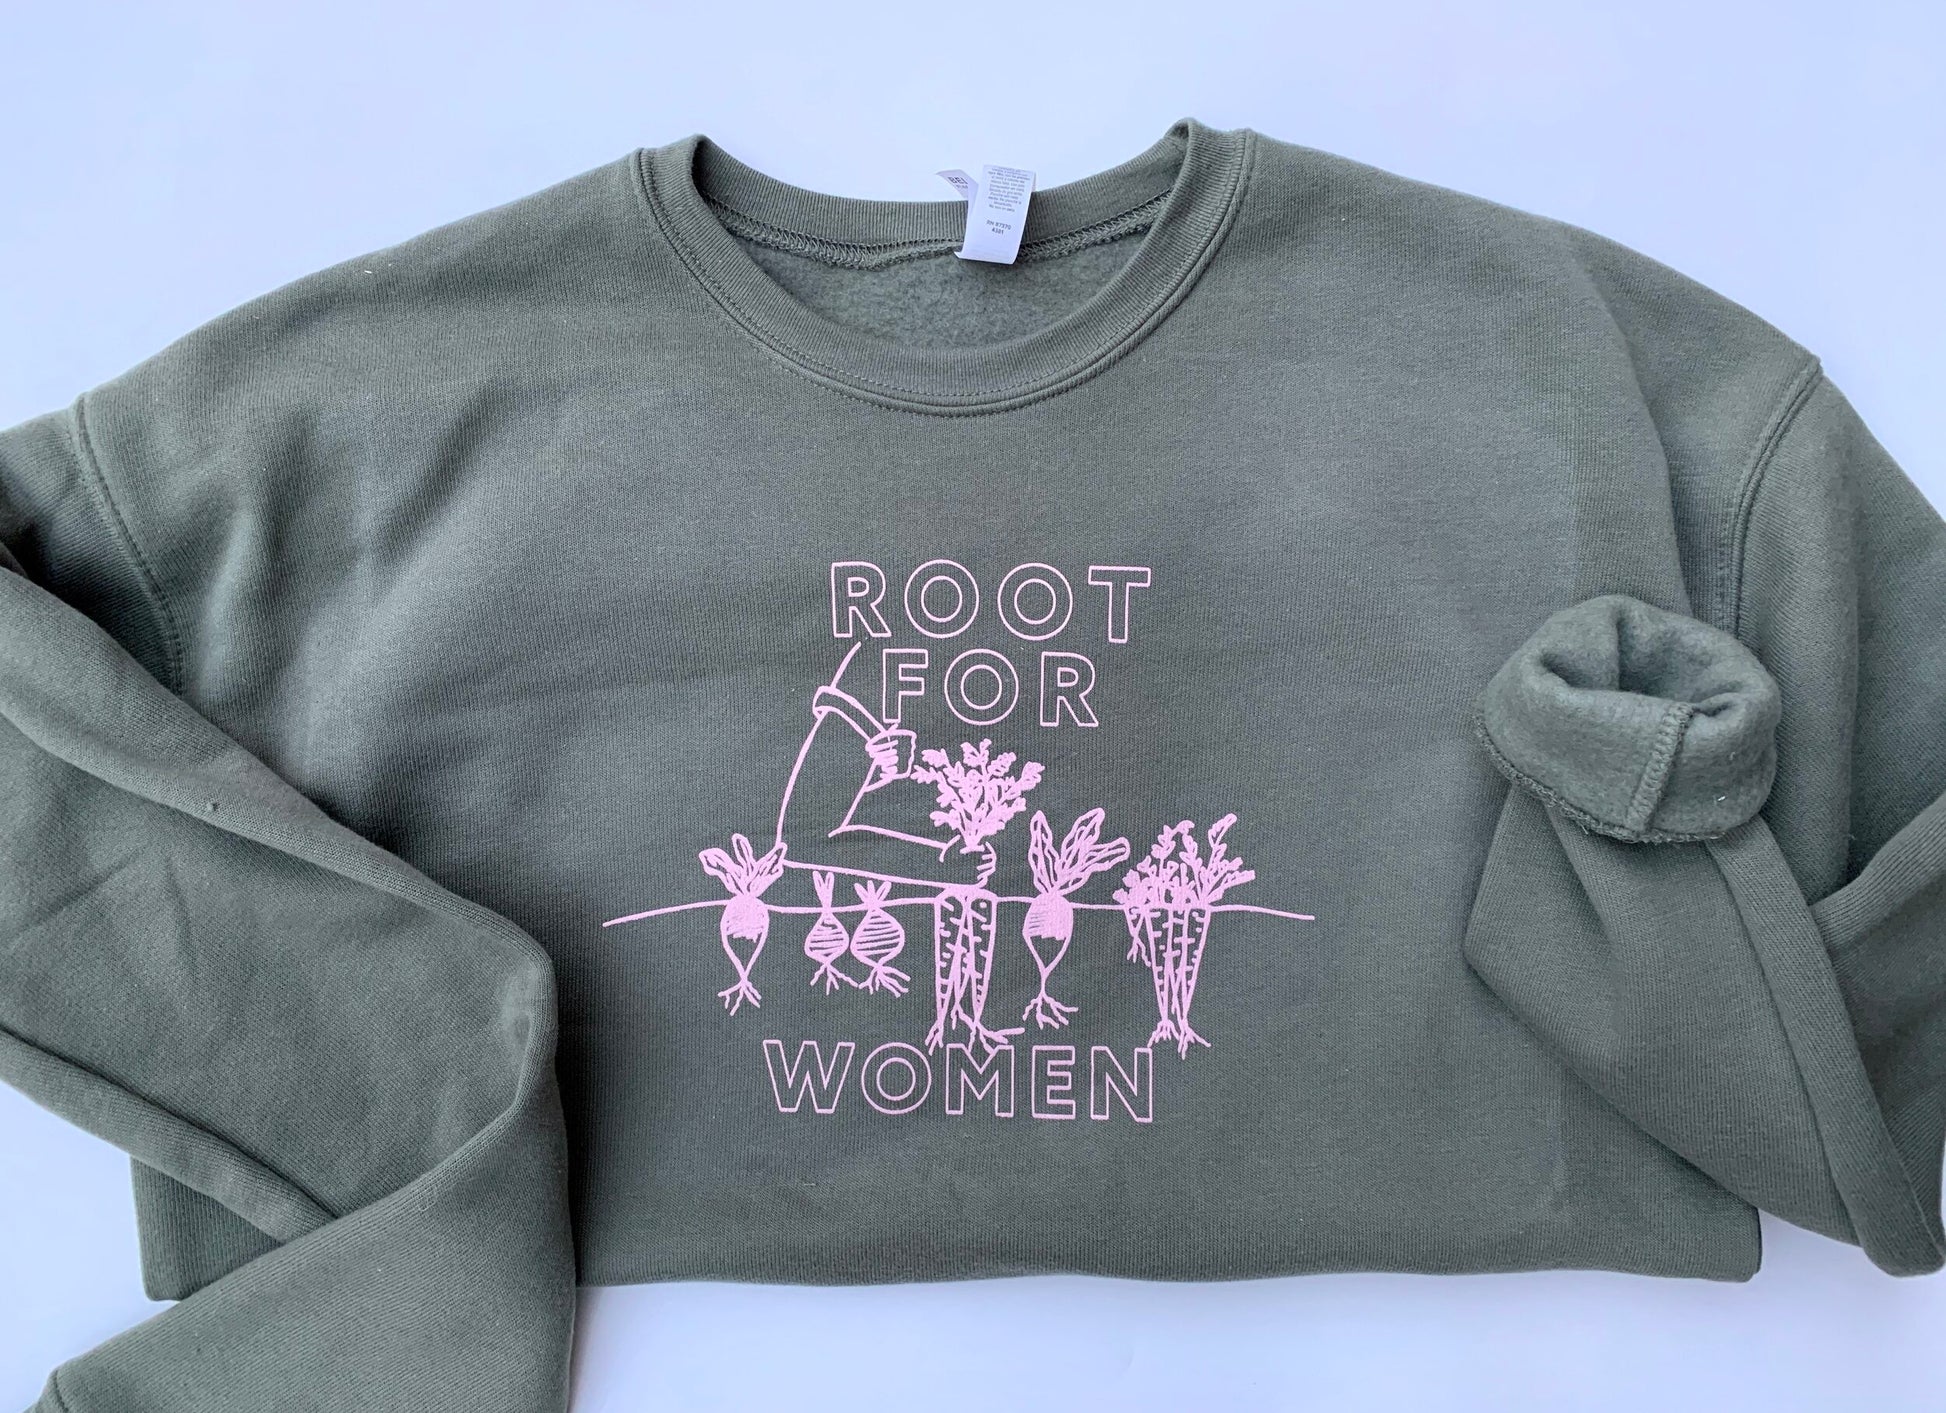 A green crewneck reads "Root for Women" in white block letters